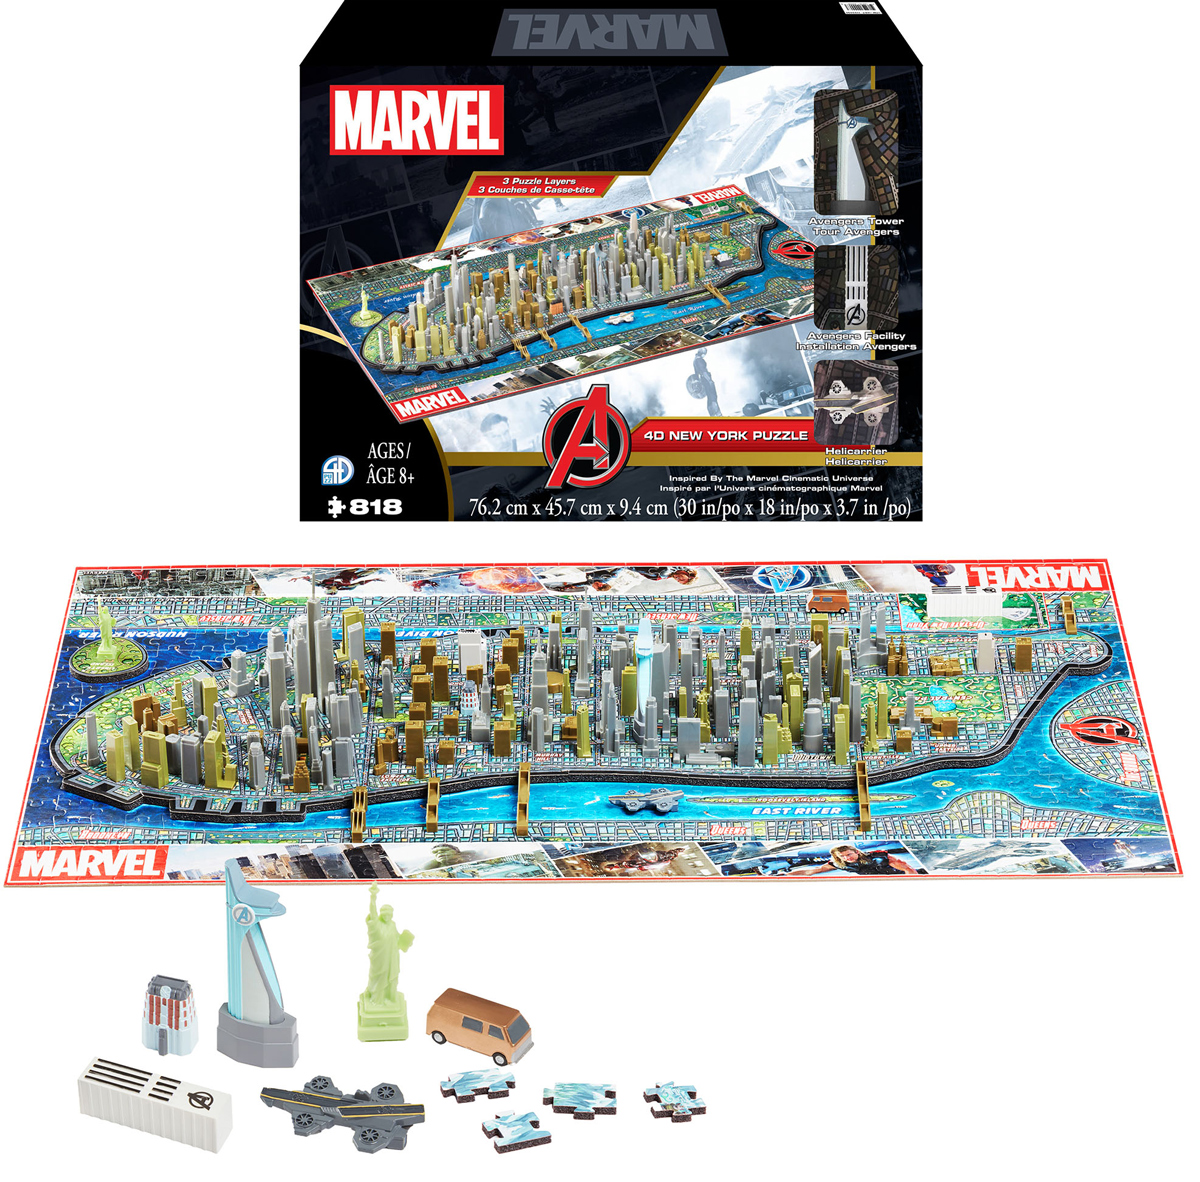 4D Puzzle:  Marvel New York Puzzle New York 4D Puzzle